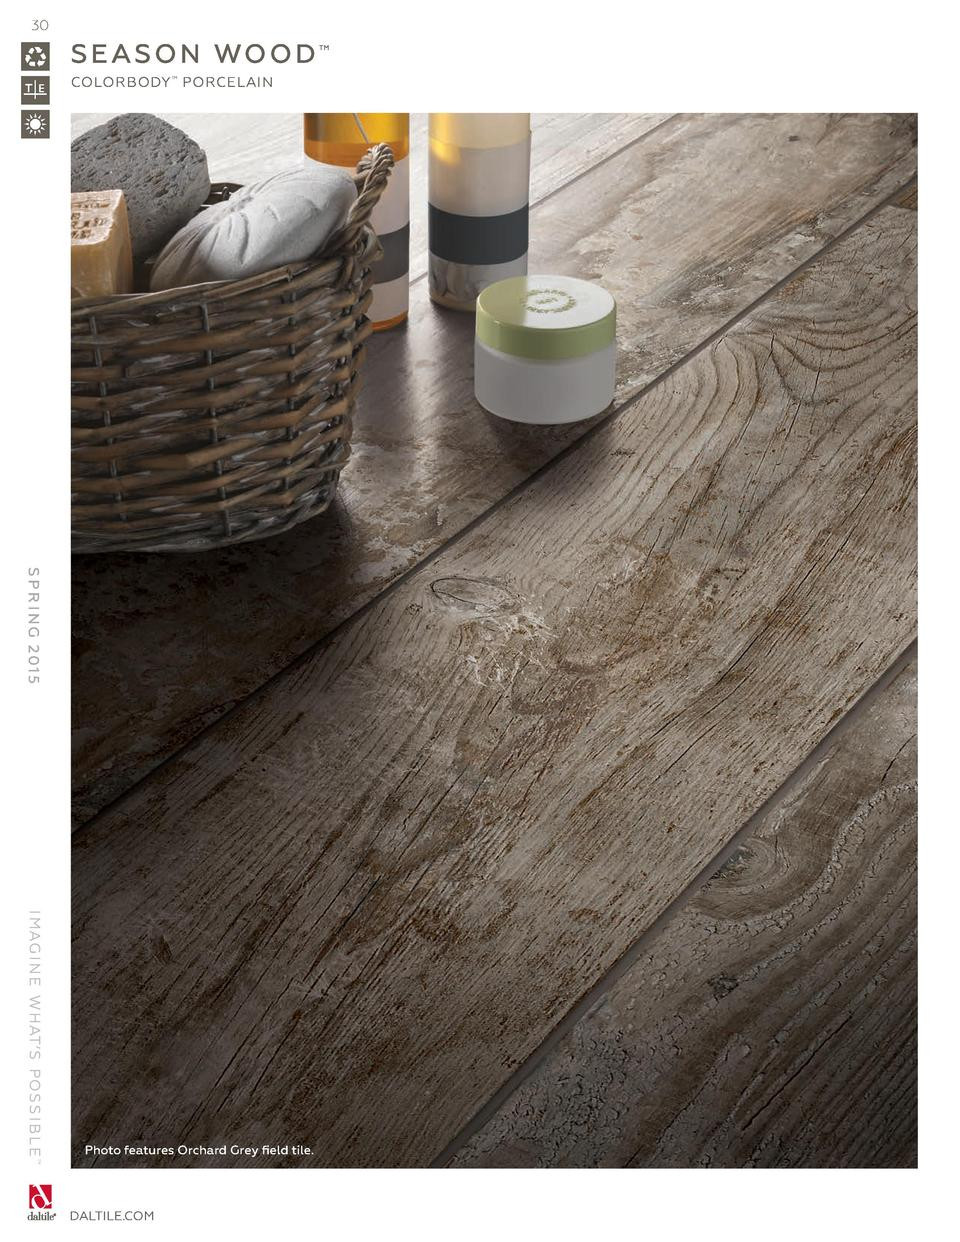 syracuse hardwood floor gallery of daltile spring 2015 catalog simplebooklet com with regard to 30 s e a s o n wo o d colorbody porcelain s p r i n g 2 01 5 i mag i n e w hat s po